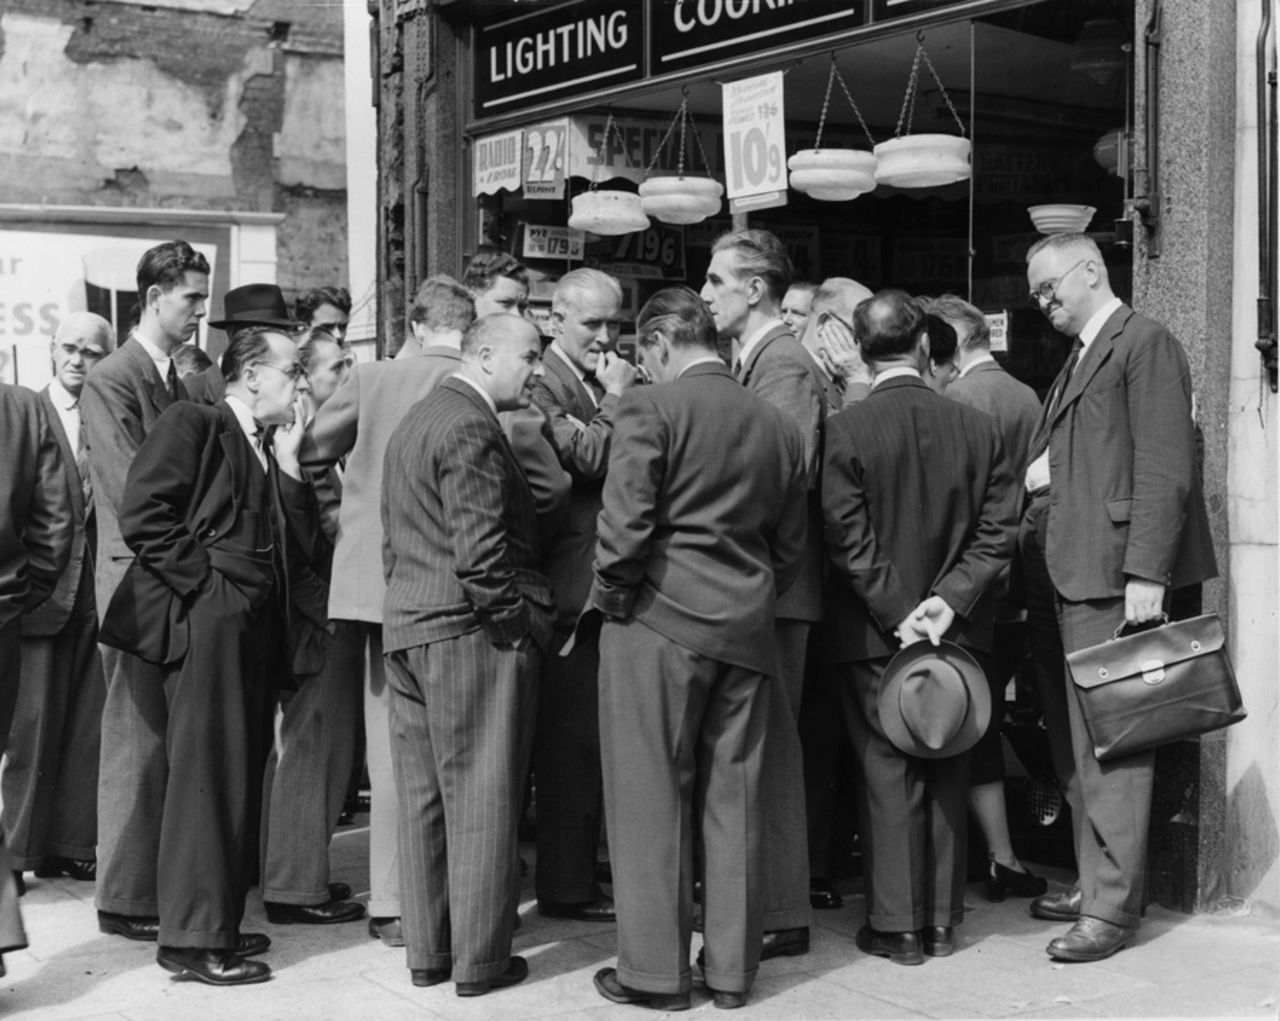 Crowds gather outside a radio shop in High Holborn listening to Test match broadcasts from The Oval, England v Australia, 5th Test, 4th day, August 19, 1953